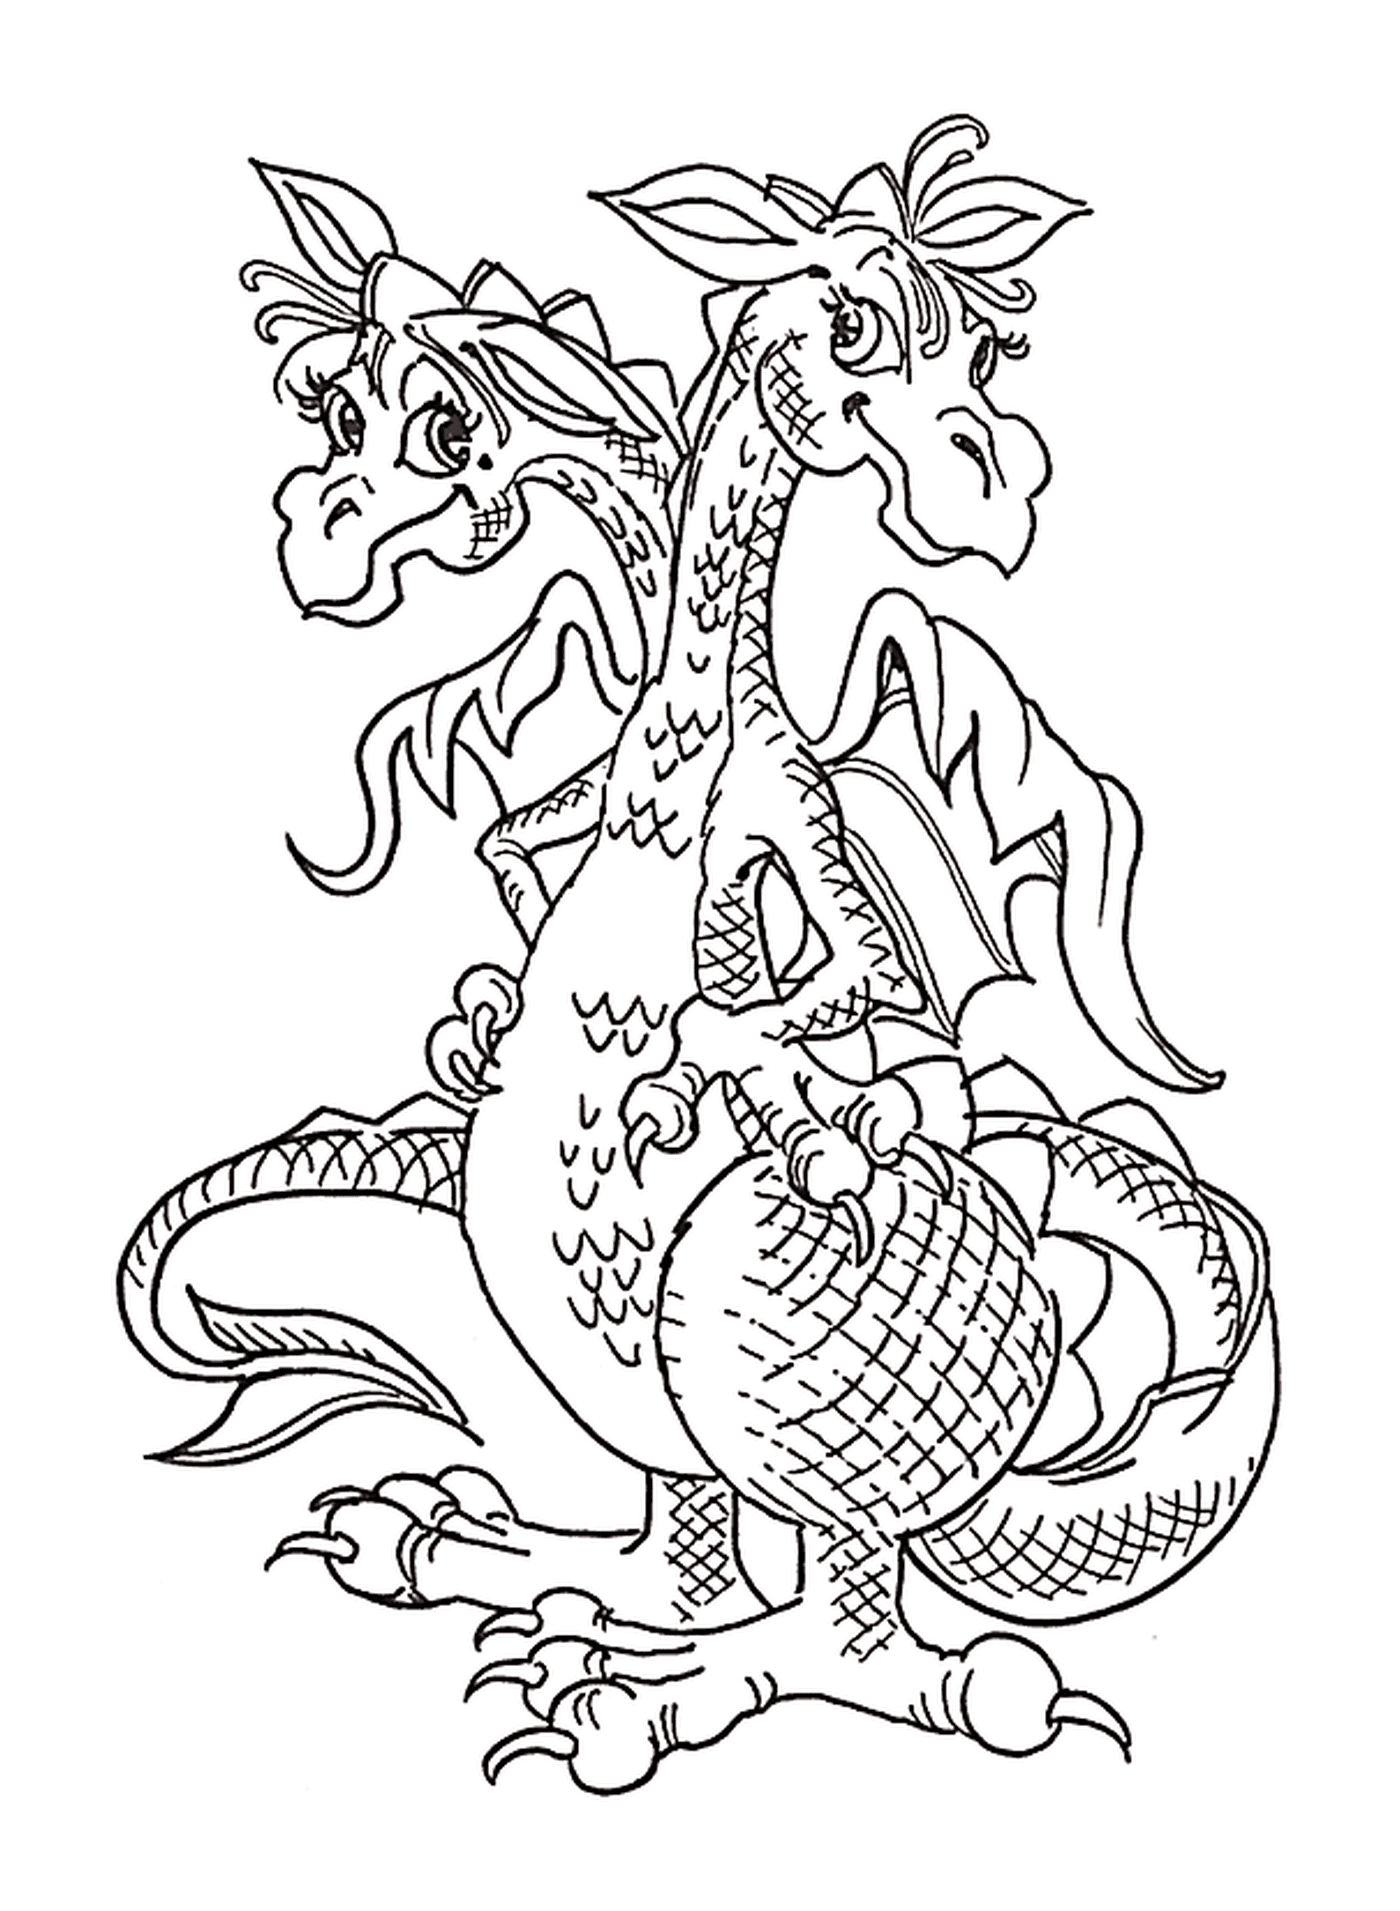  A dragon with two heads 